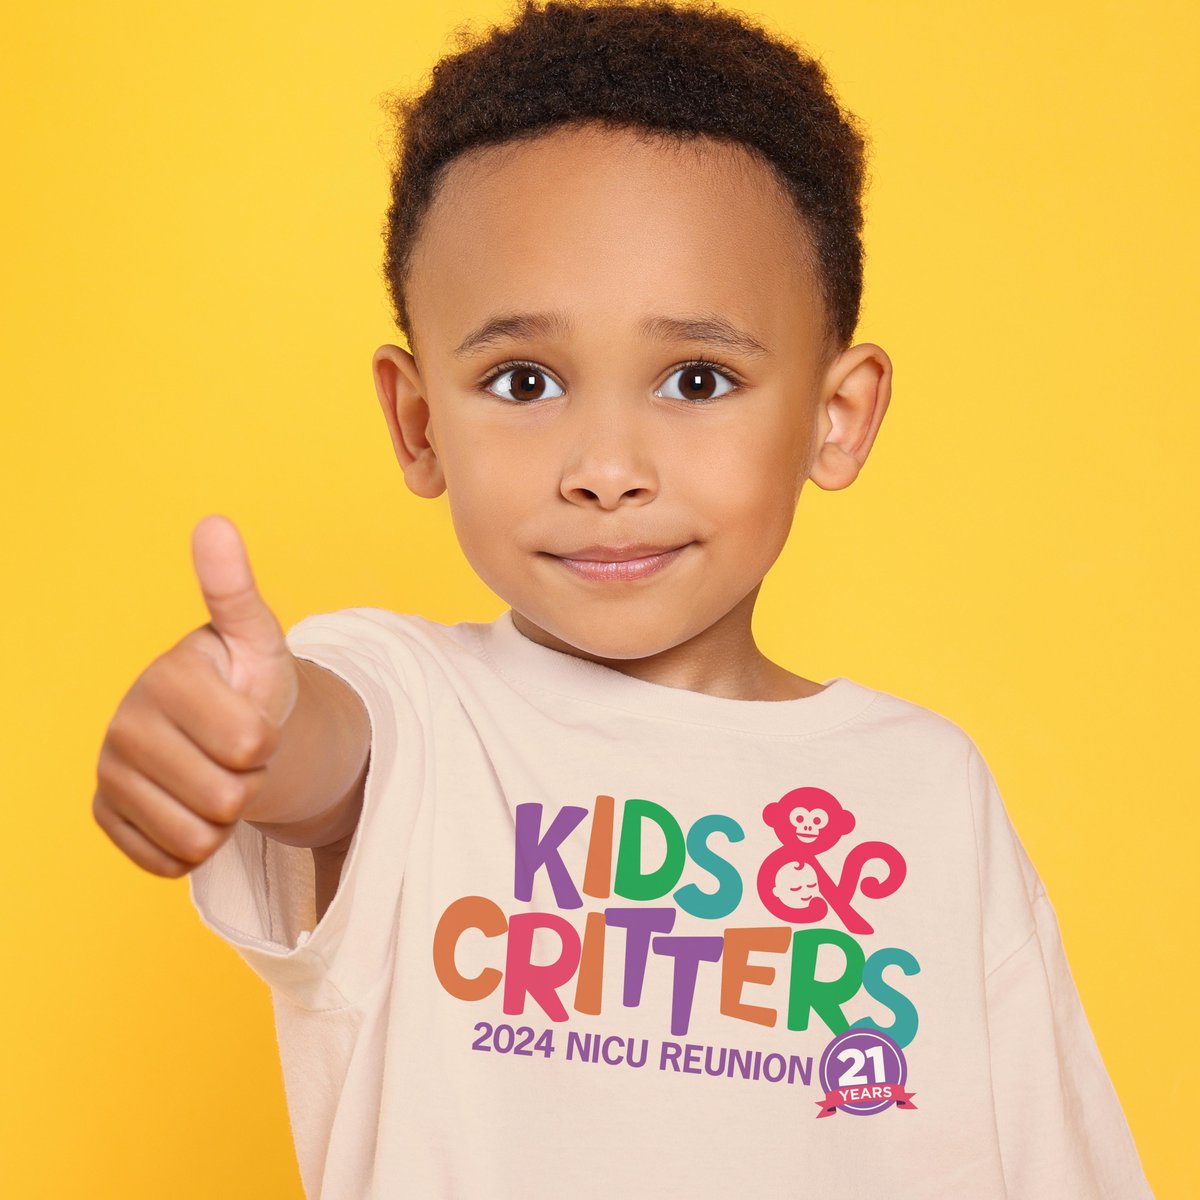 👕 Don’t forget to order your T-shirt for the 21st Annual “Kids & Critters” NICU Reunion on June 9 at the @pghzoo. All NICU graduates of UPMC Magee-Womens and @ChildrensPgh are invited! Get your tickets & t-shirts ny June 1 at MageeWomens.org/NICU.